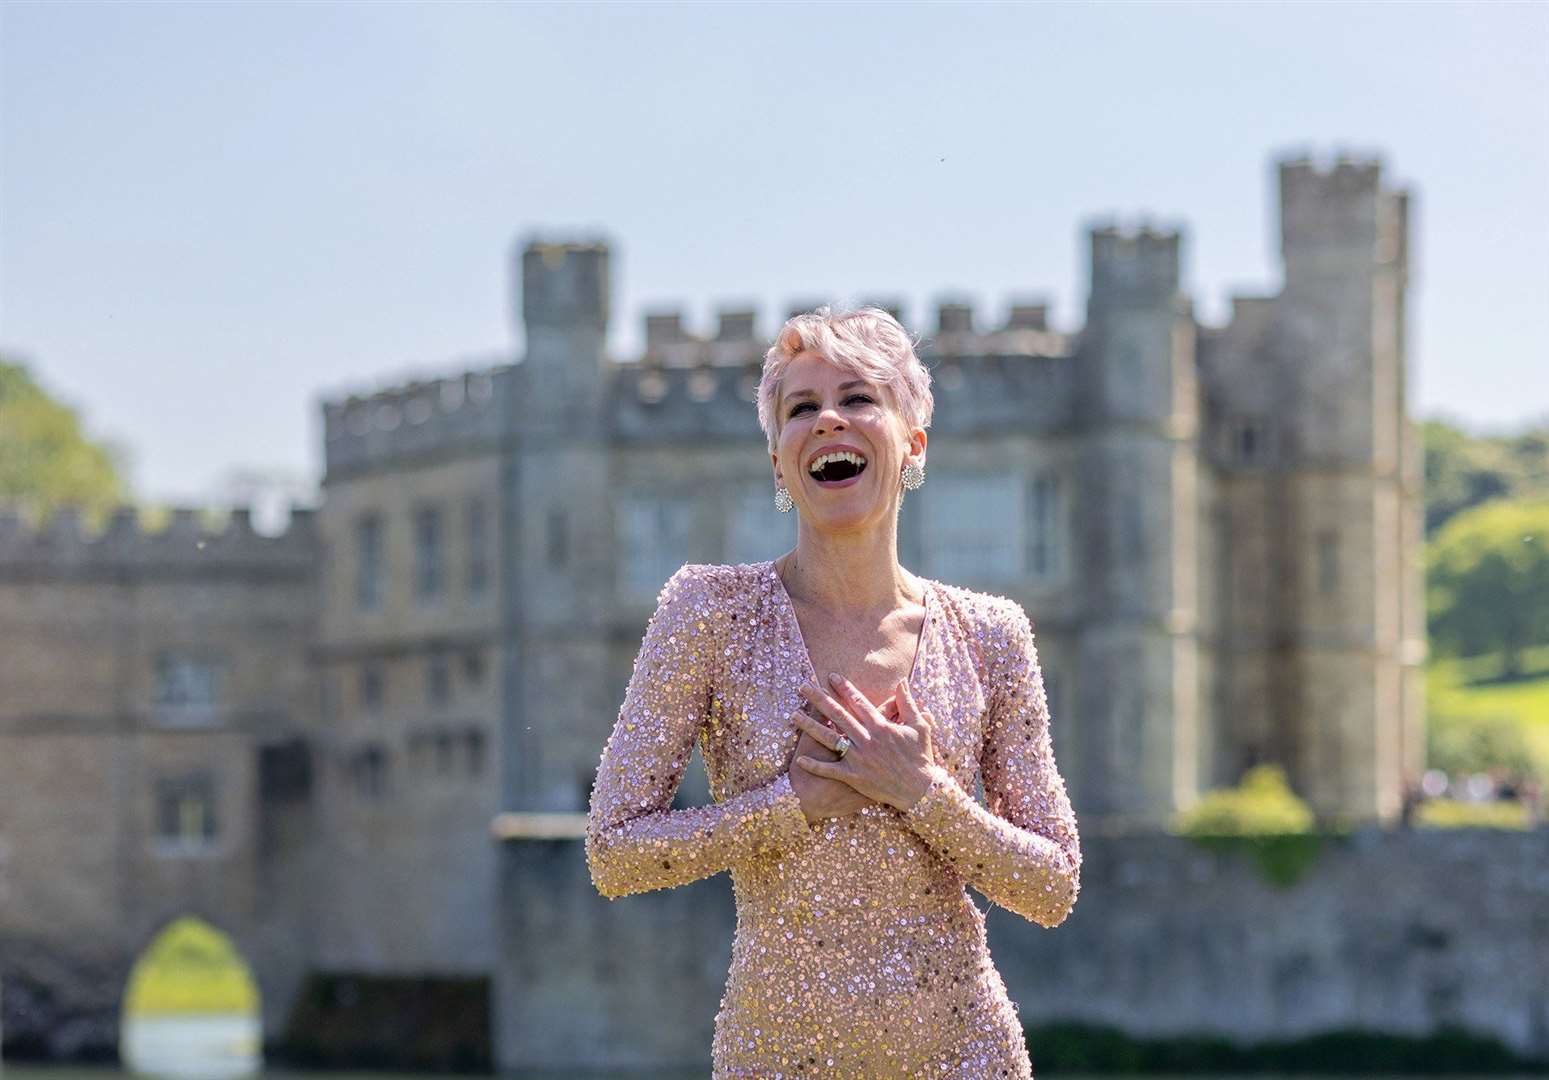 Faversham-based singer Anna-Jane Casey will perform at this year's Leeds Castle Concert. Picture: Luke Granger Photography